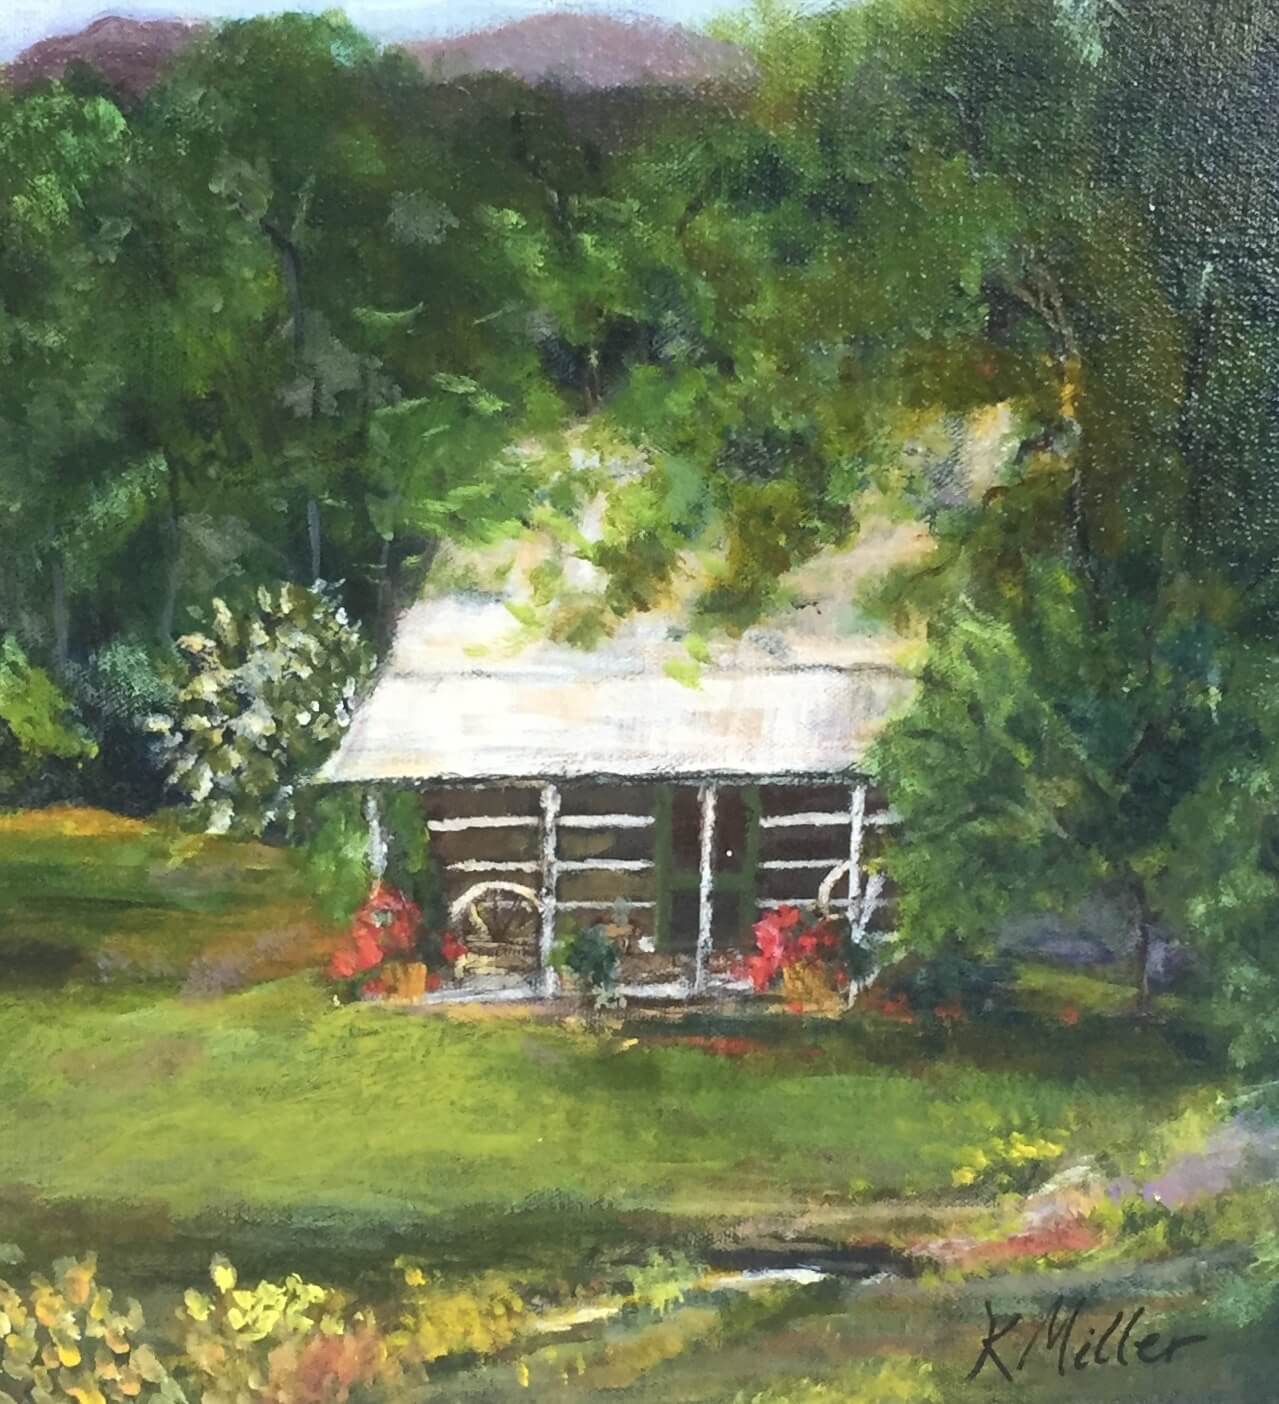 James' Cabin 12" x 12" Acrylic on Canvas Original Painting by Kathy Miller